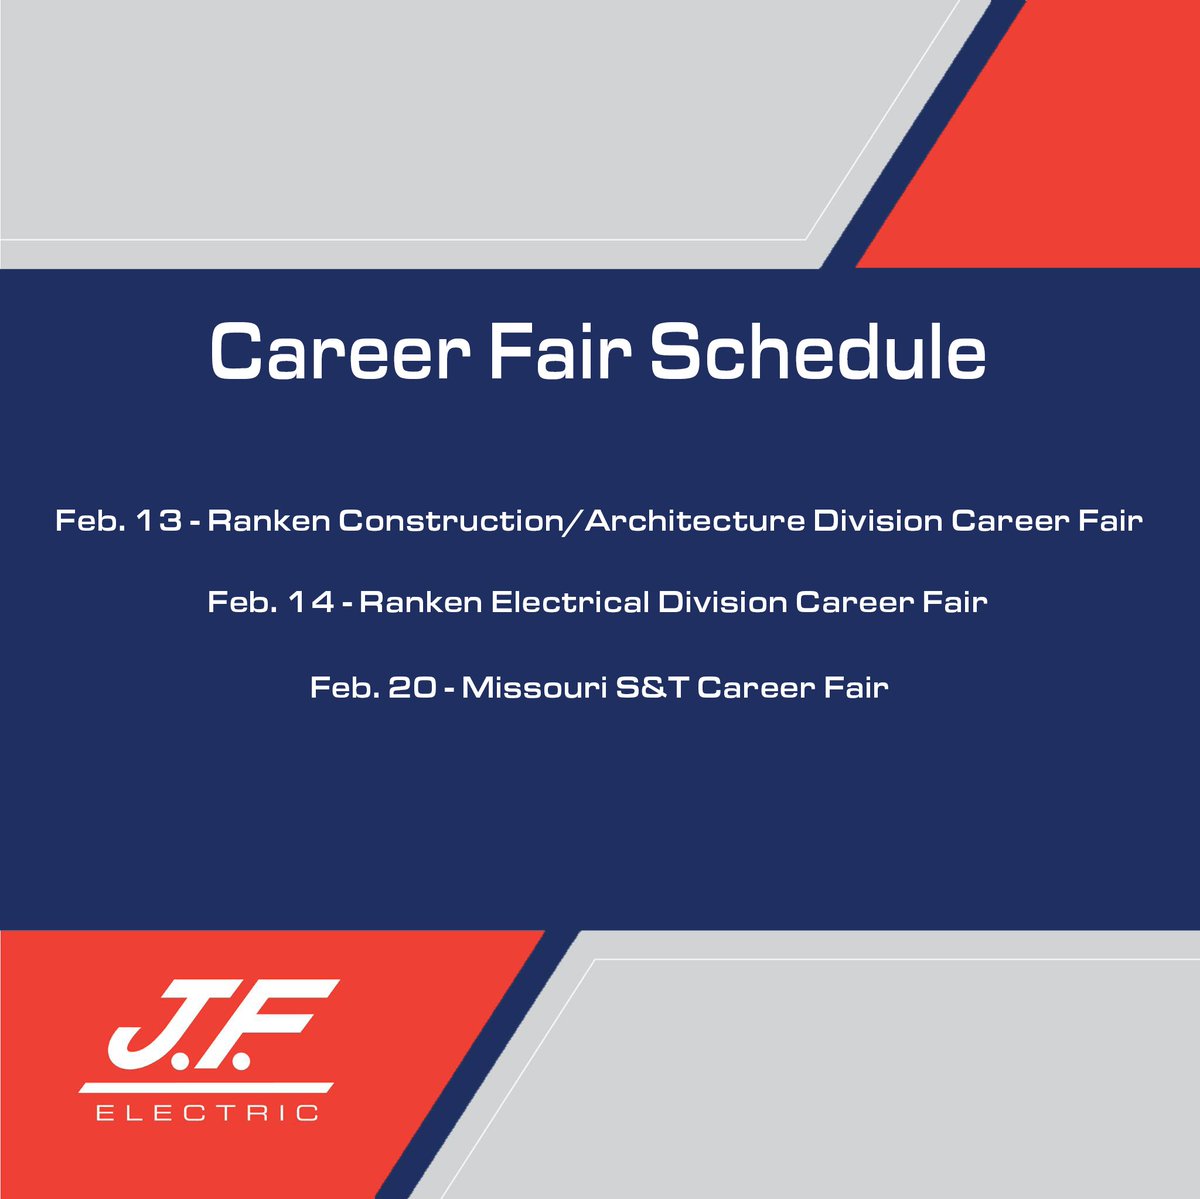 Ready for a bright future? Meet us at our upcoming career fairs and discover how you can join the J.F. Electric team.

#Creatingconnections #Deliveringvalue